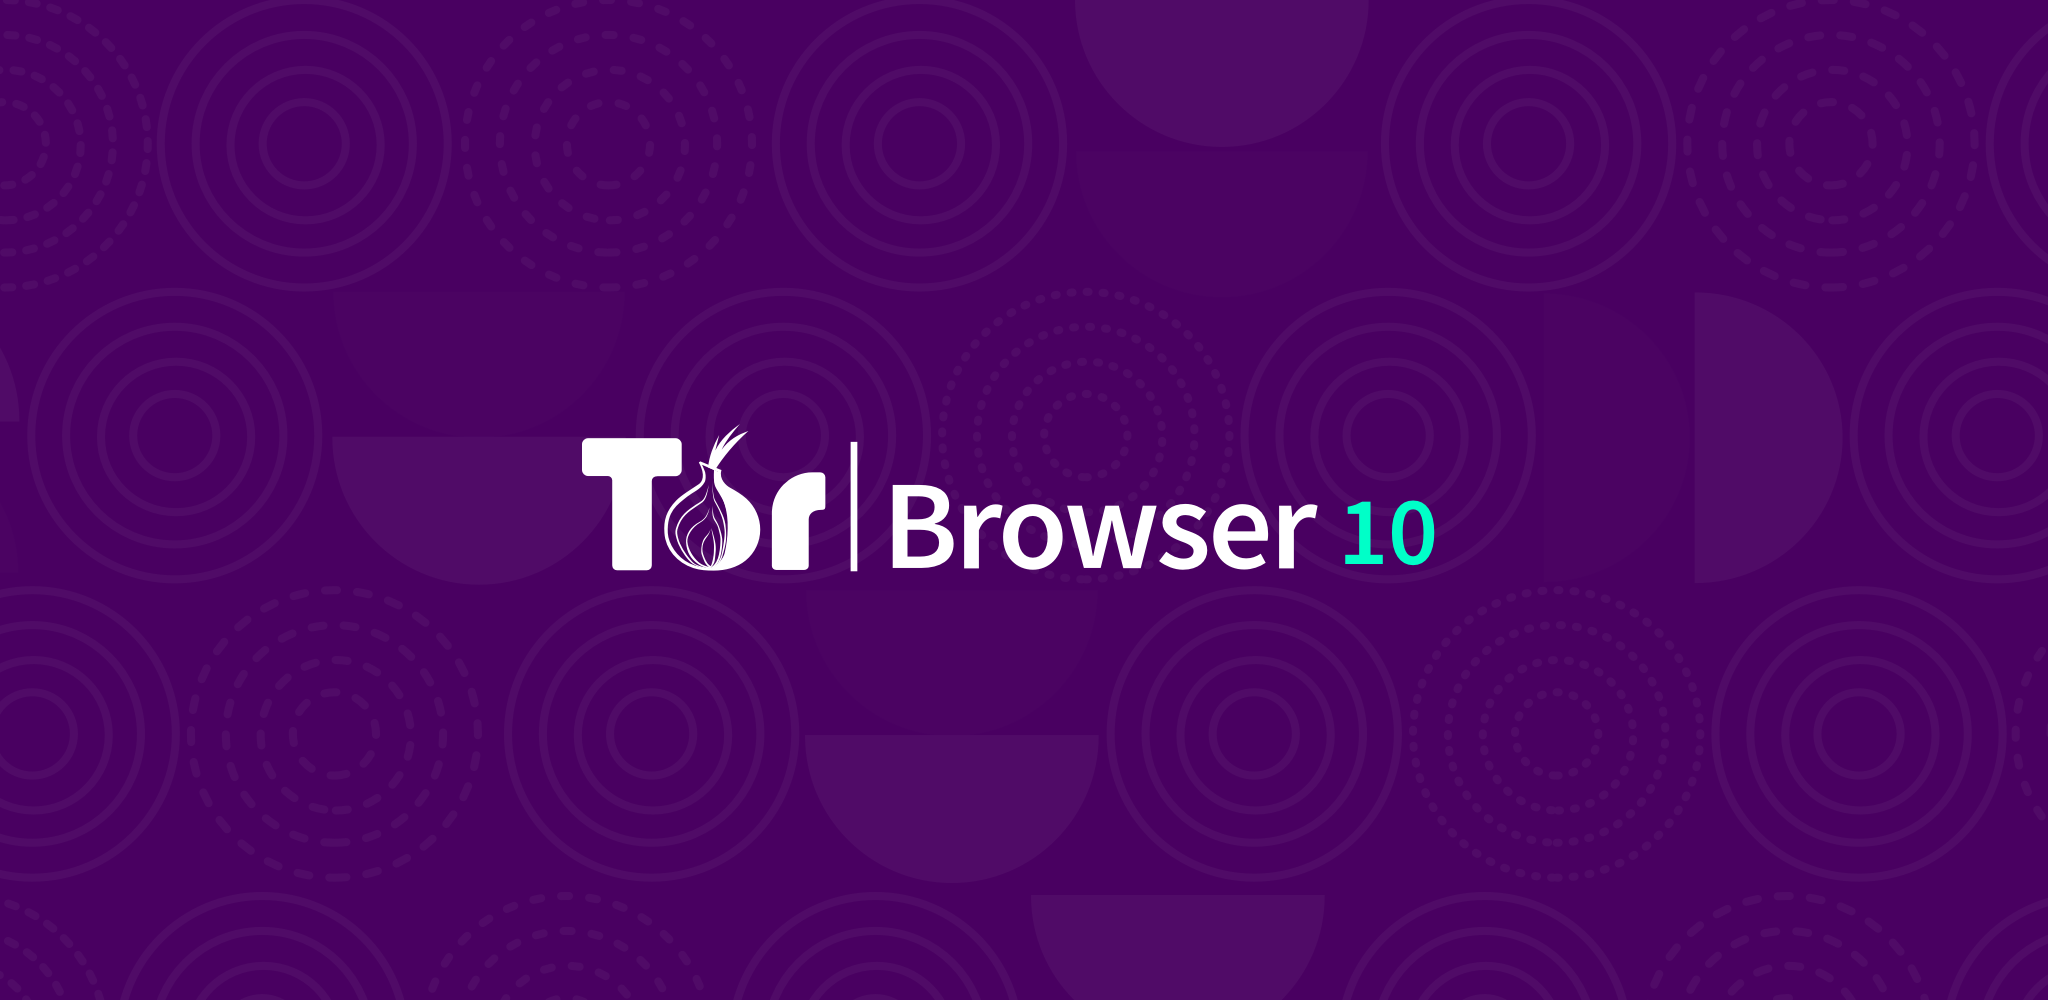 tor browser os гирда